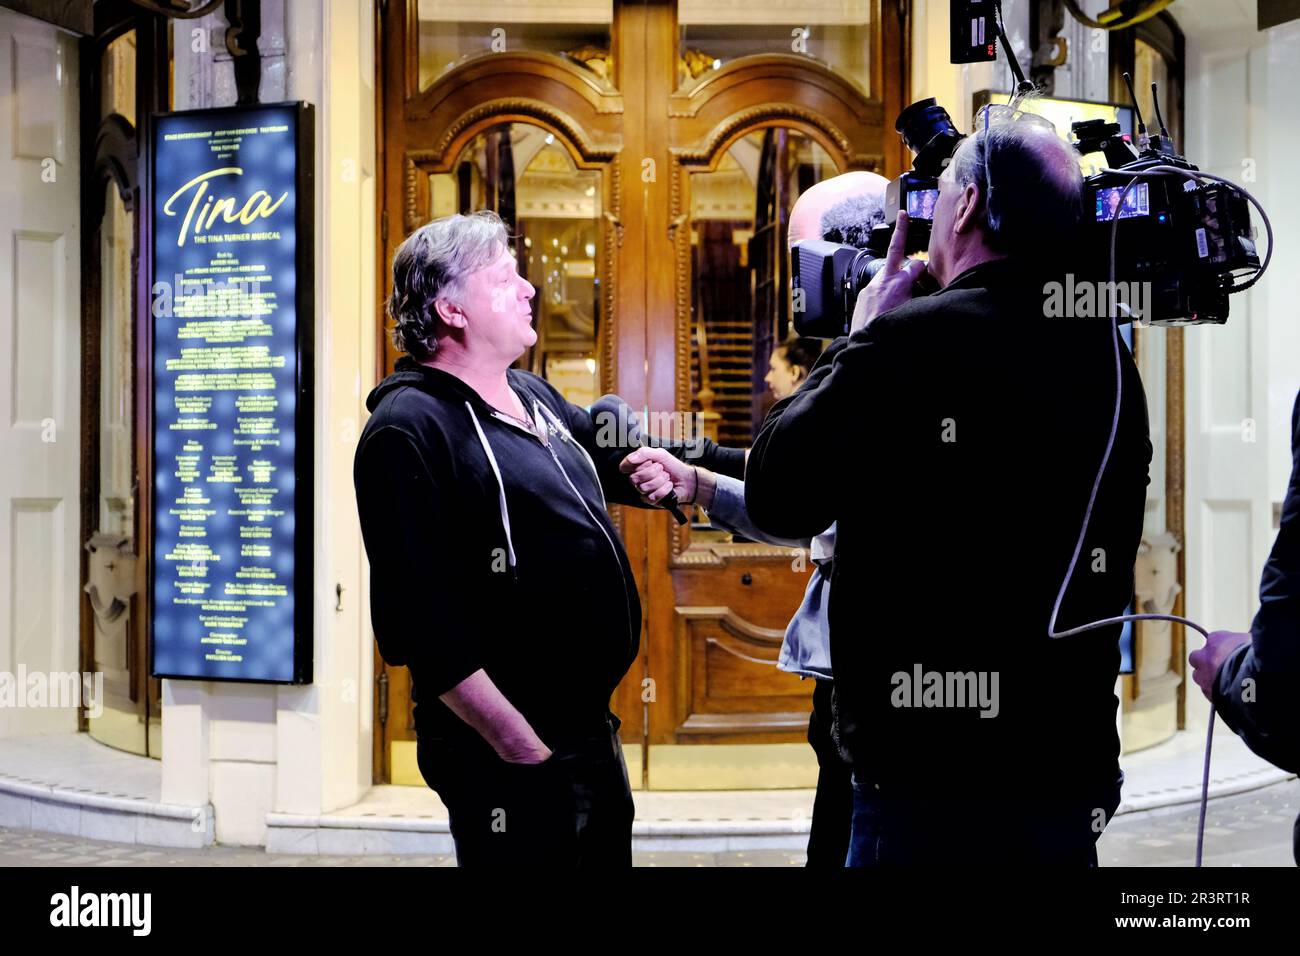 London, UK. 24th May, 2023. A Tina Turner fan, reportedly a former dancer for the star, is interviewed by a camera crew  outside the Aldwych Theatre where a production of Tina: The Tina Turner Musical has been showing since 2018. It was announced by her publicist, that the charismatic Tennessee born 'Queen of Rock 'n' Roll', died peacefully this evening at the age of 83 after a long illness. Credit: Eleventh Hour Photography/Alamy Live News Stock Photo